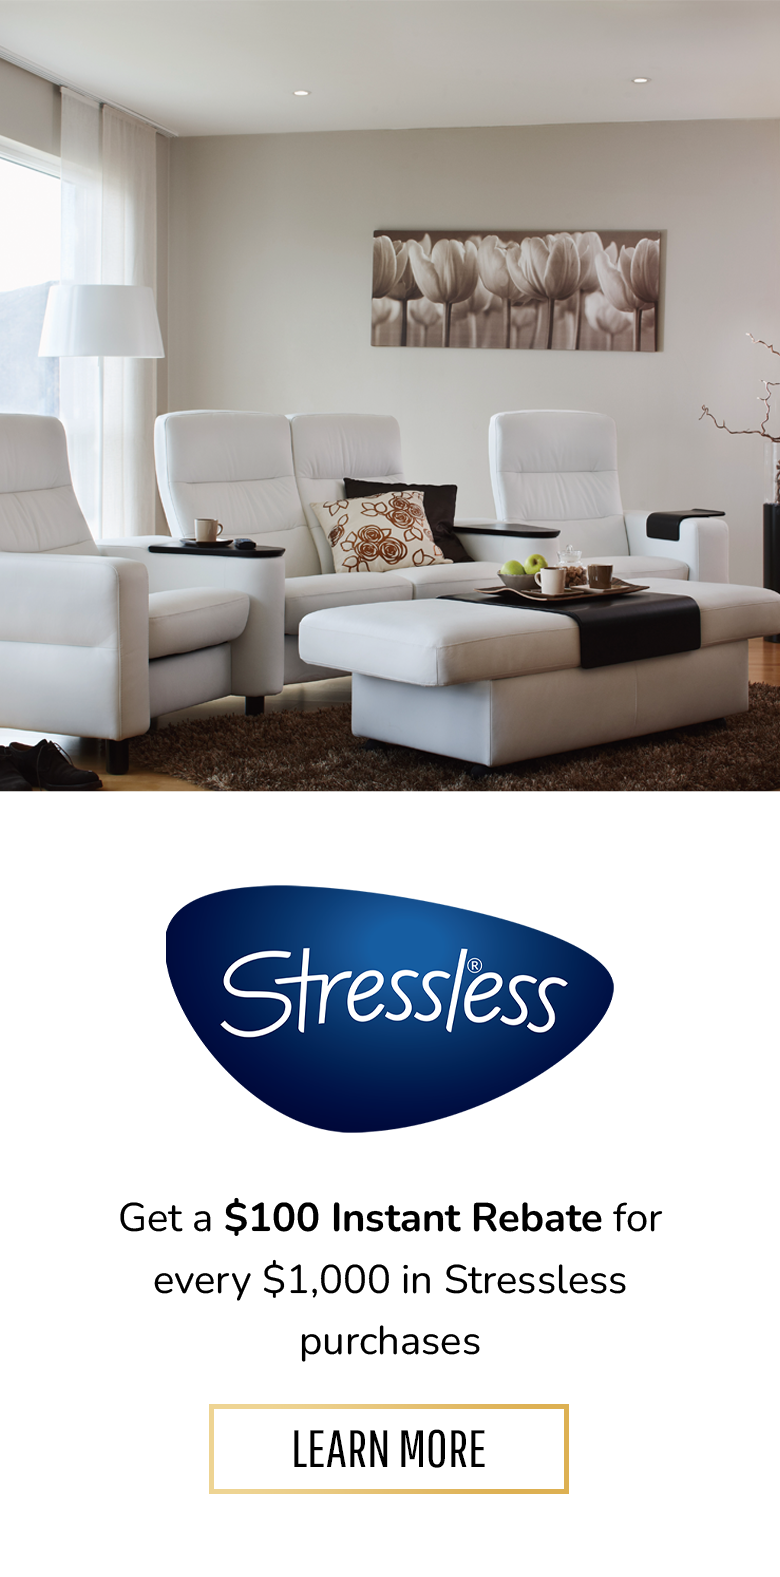 Get a $100 Instant Rebate for every $1,000 in Stressless purchases